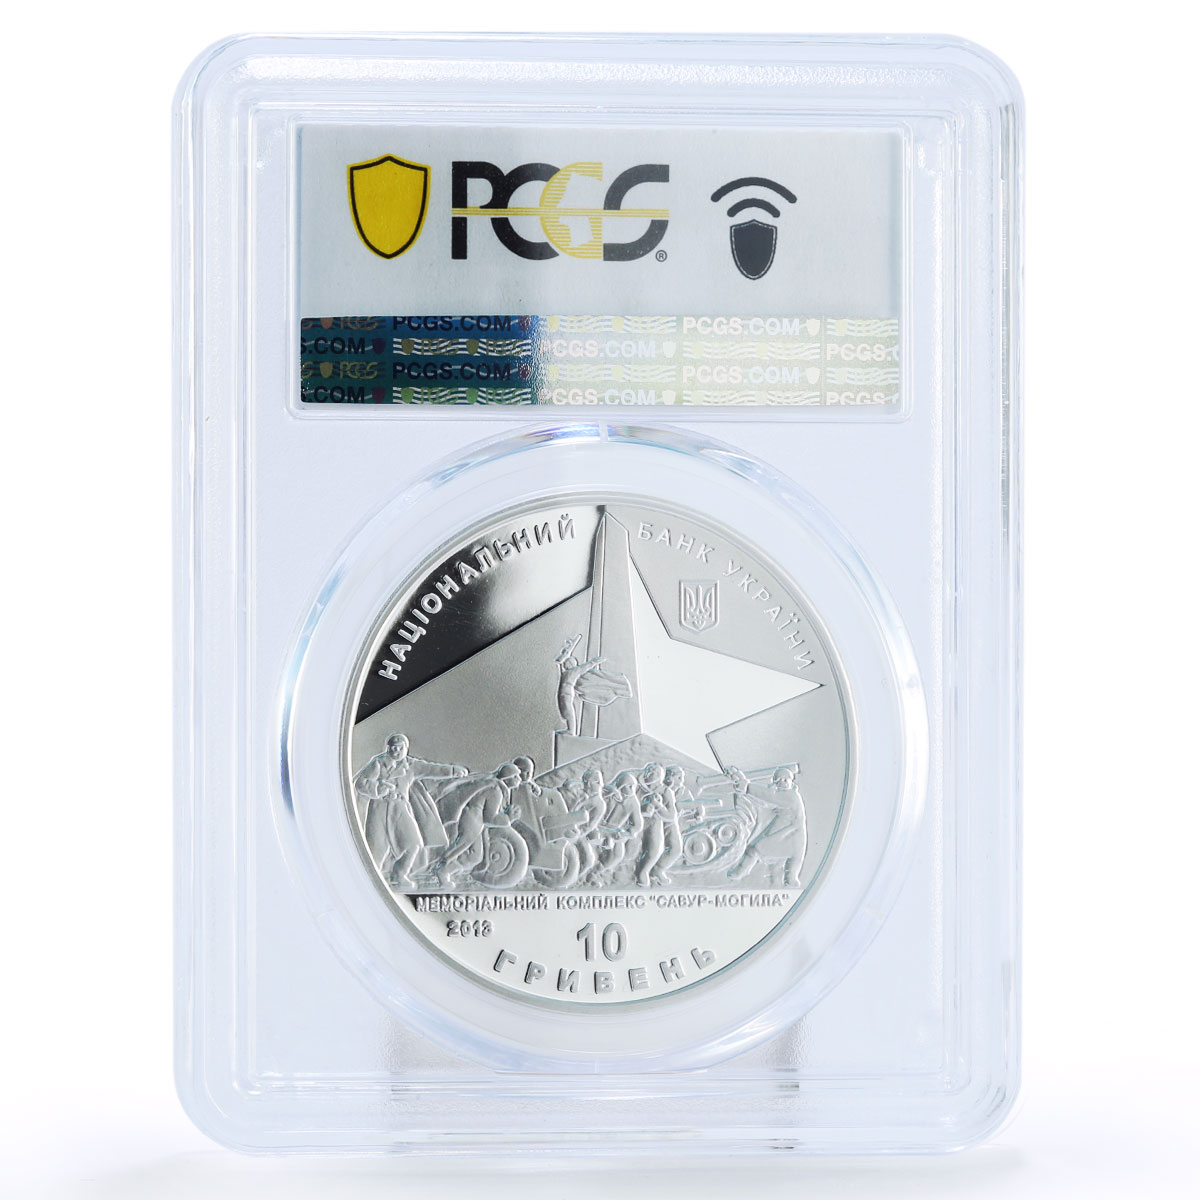 Ukraine 10 hryvnias Donbass Liberation From the Fascists PR67 PCGS Ag coin 2013